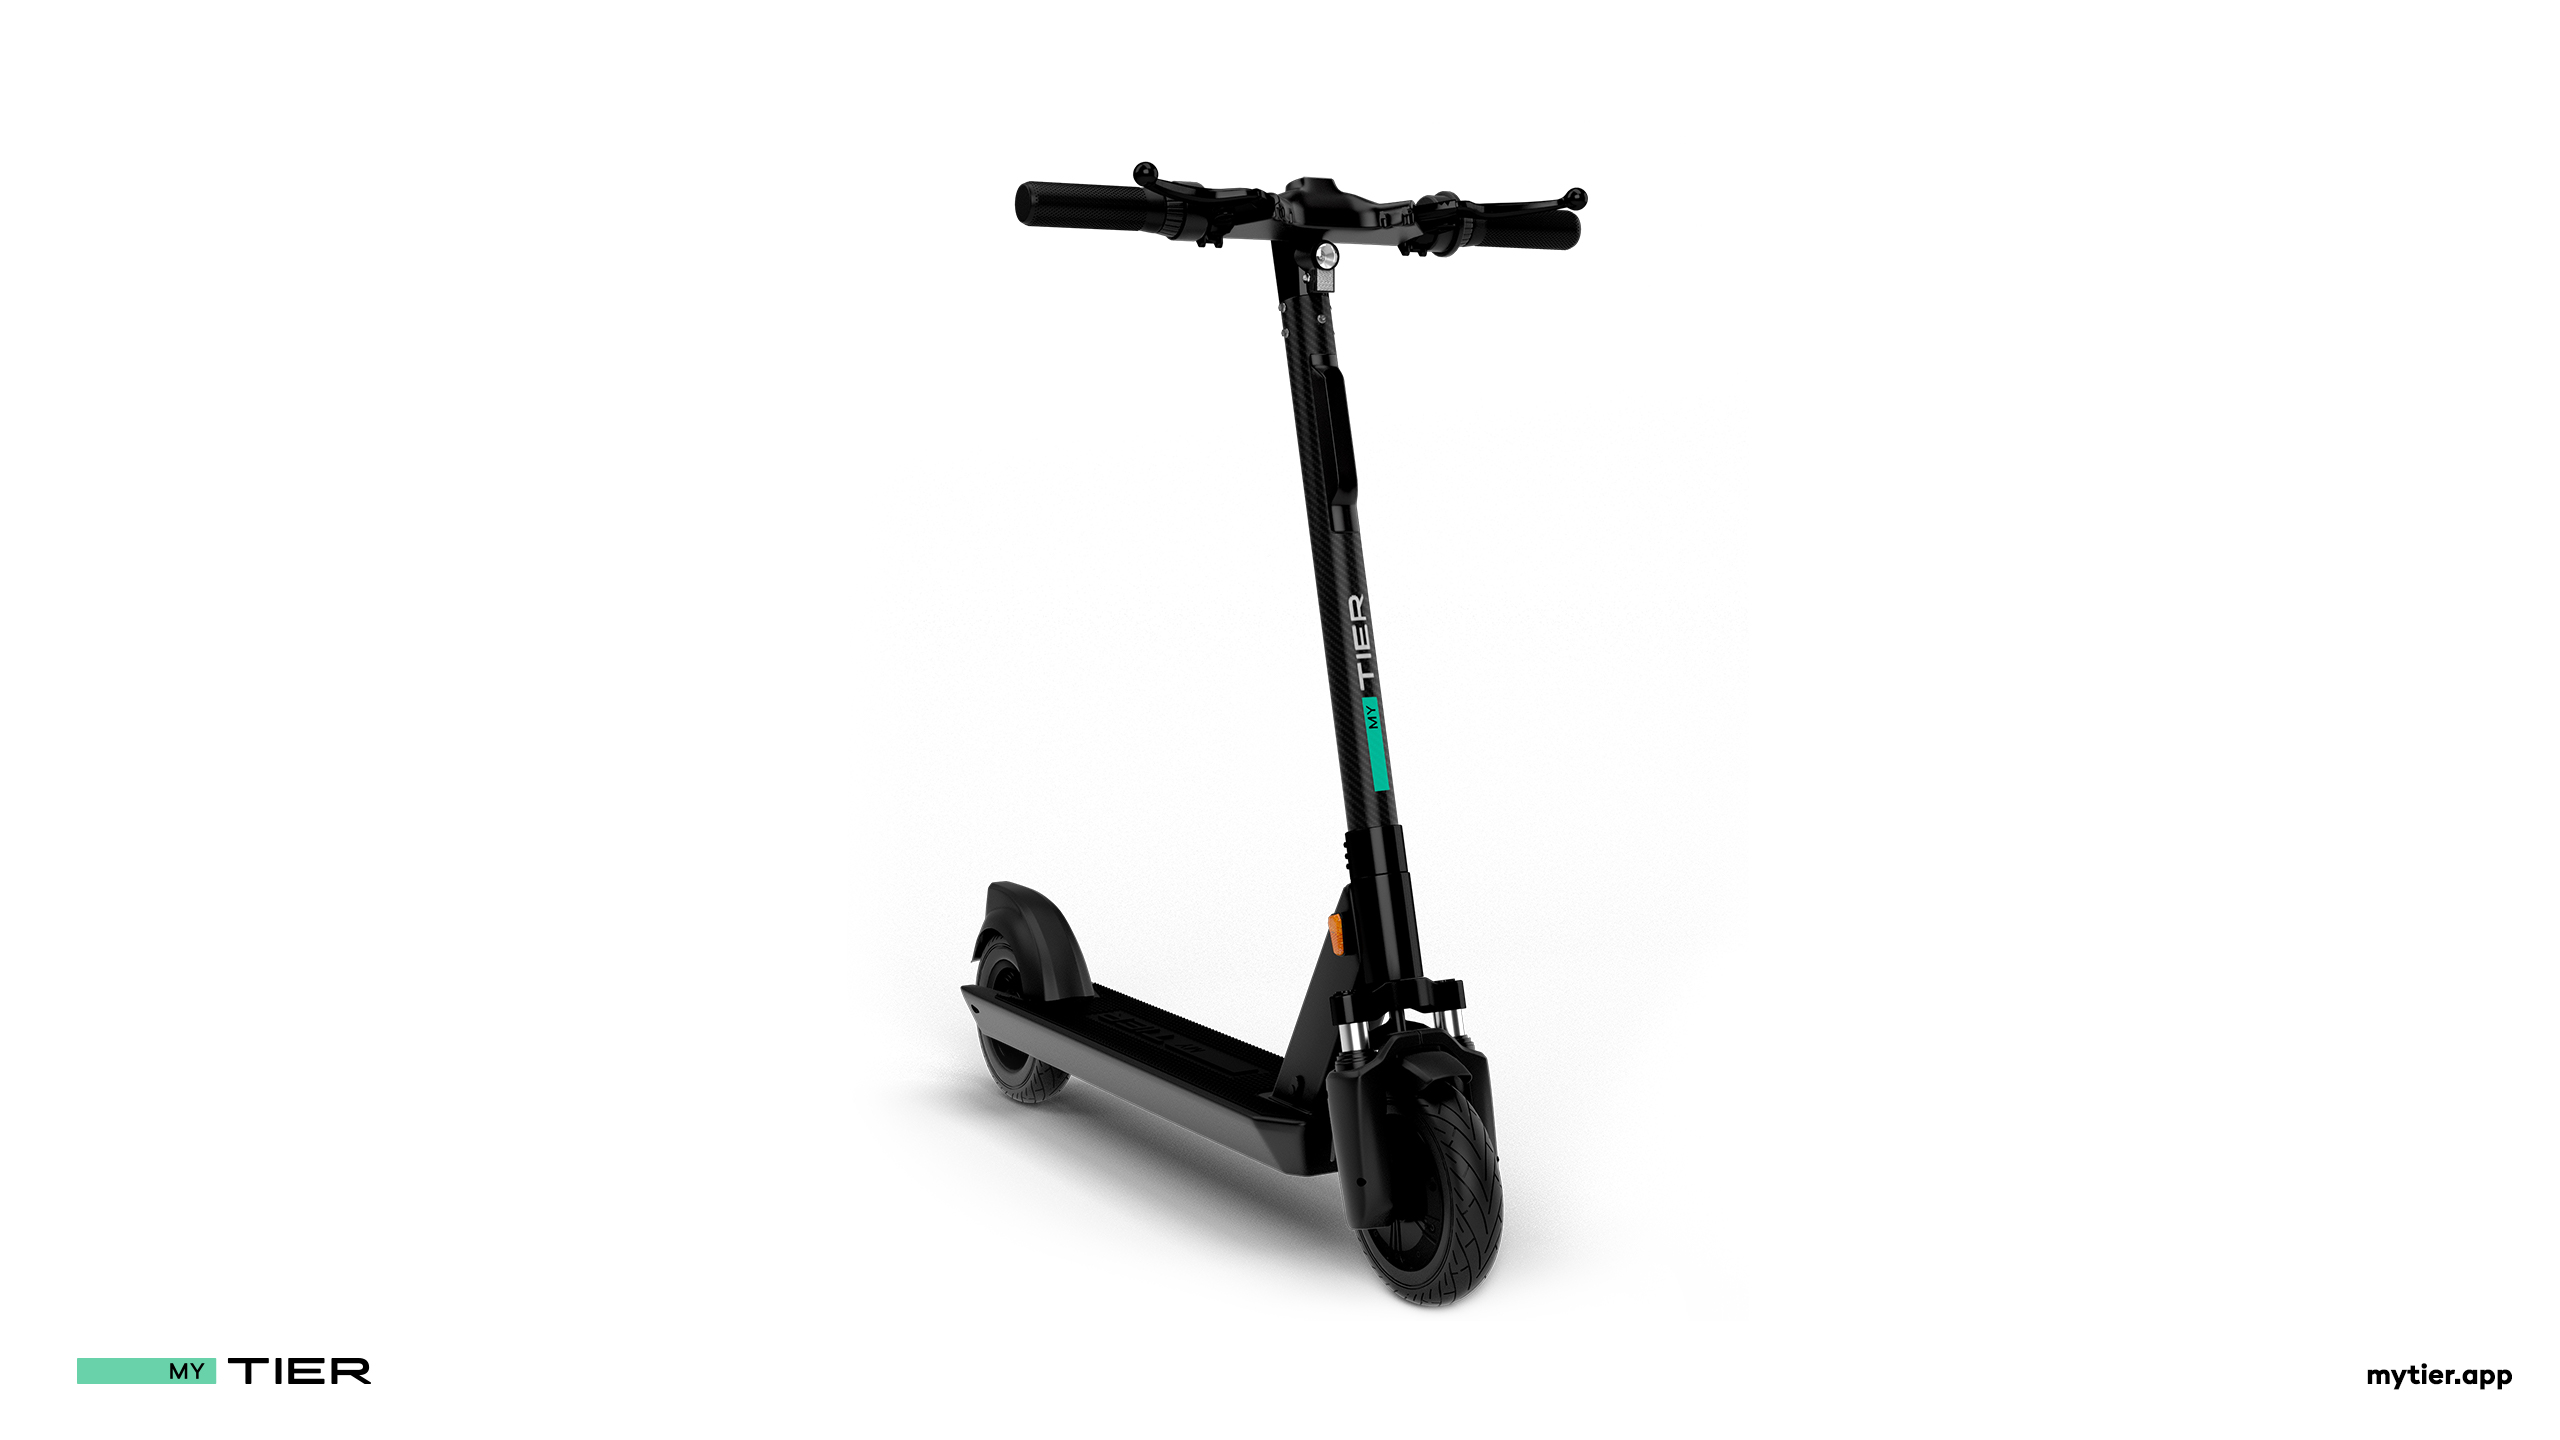 TIER expands its offering selling refurbished e-scooters from its own fleet (TIER Mobility alkaa myydä käytettyjä Saksassa – hinta 699 euroa) | TIER Mobility